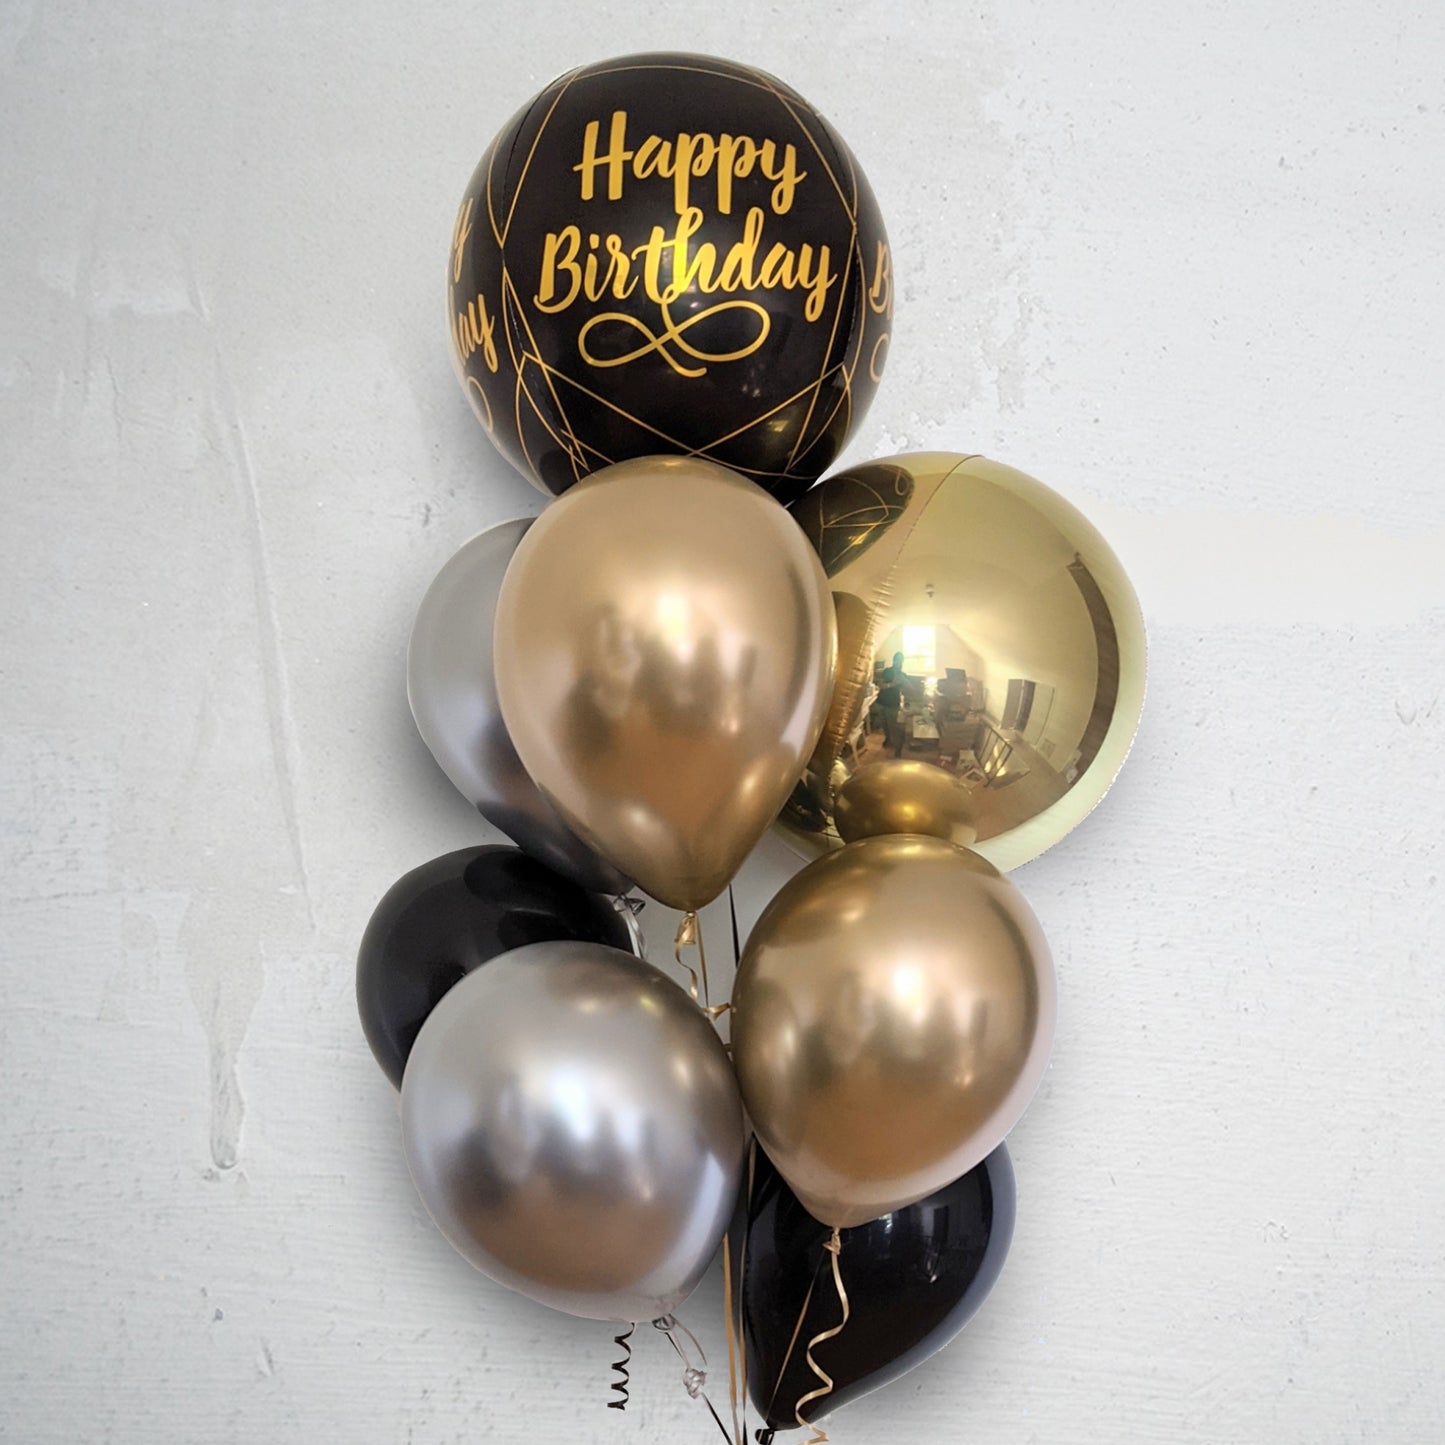 Black, Gold and Silver birthday balloons